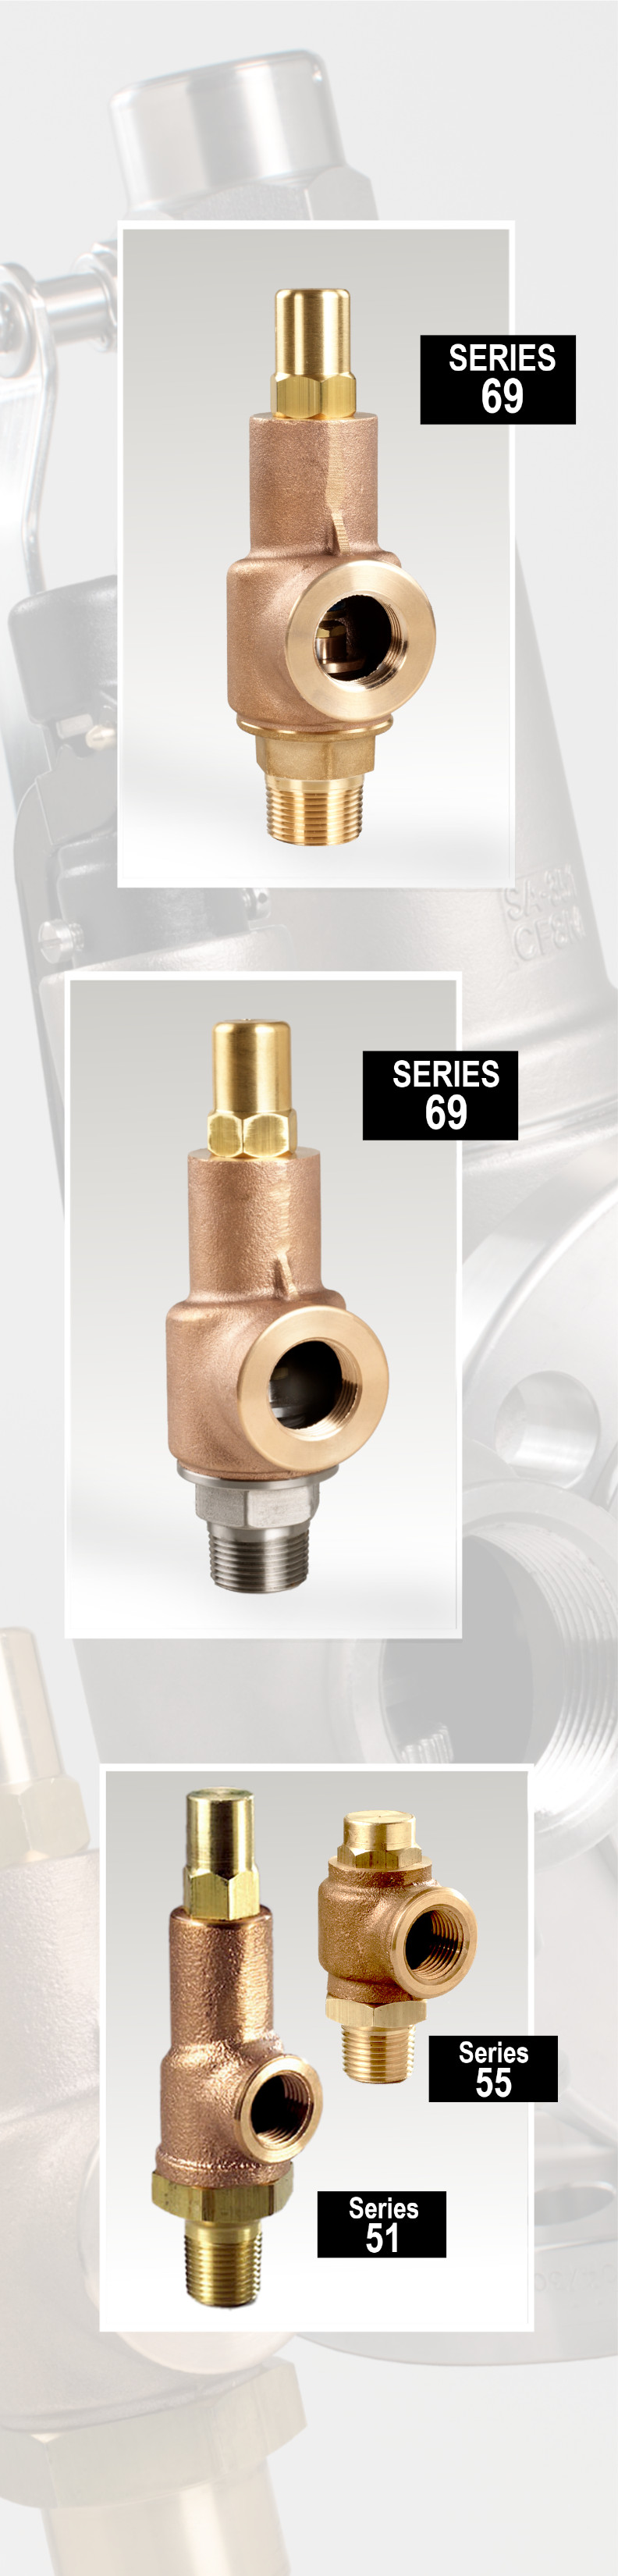 brass and stainless liquid relief valves